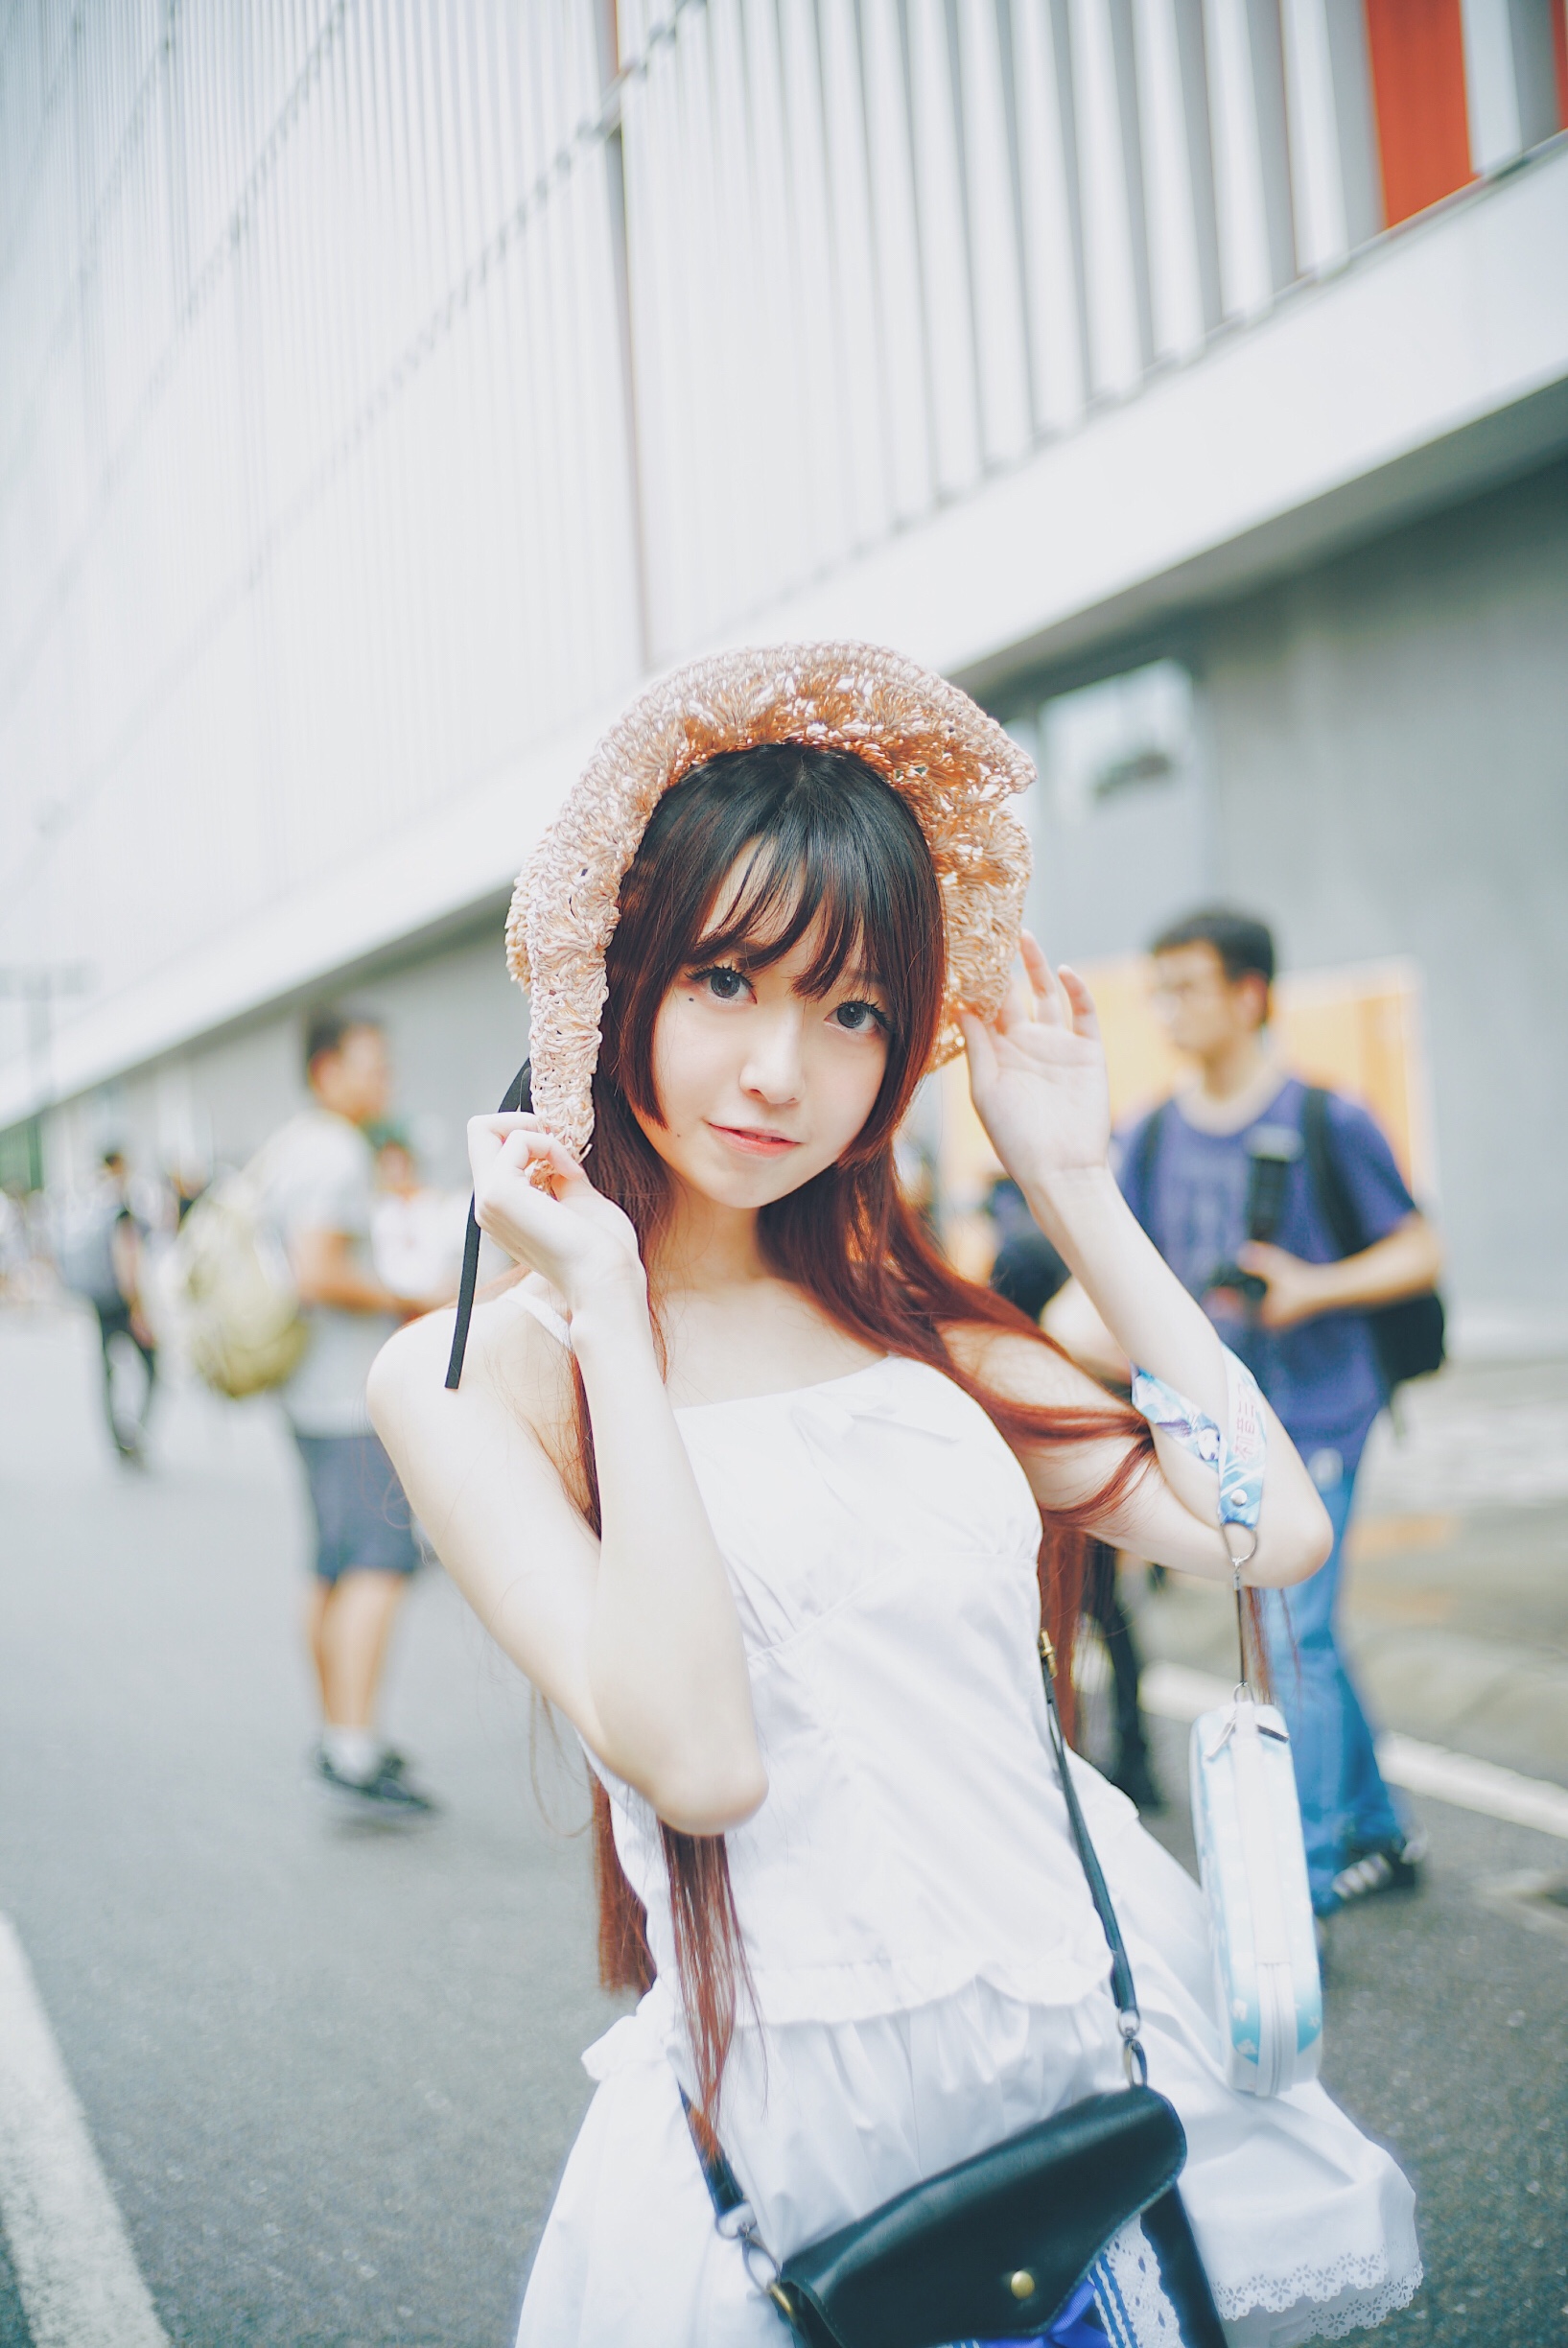 People 1635x2448 Chinese model model cosplay photography Asian hat white dress women